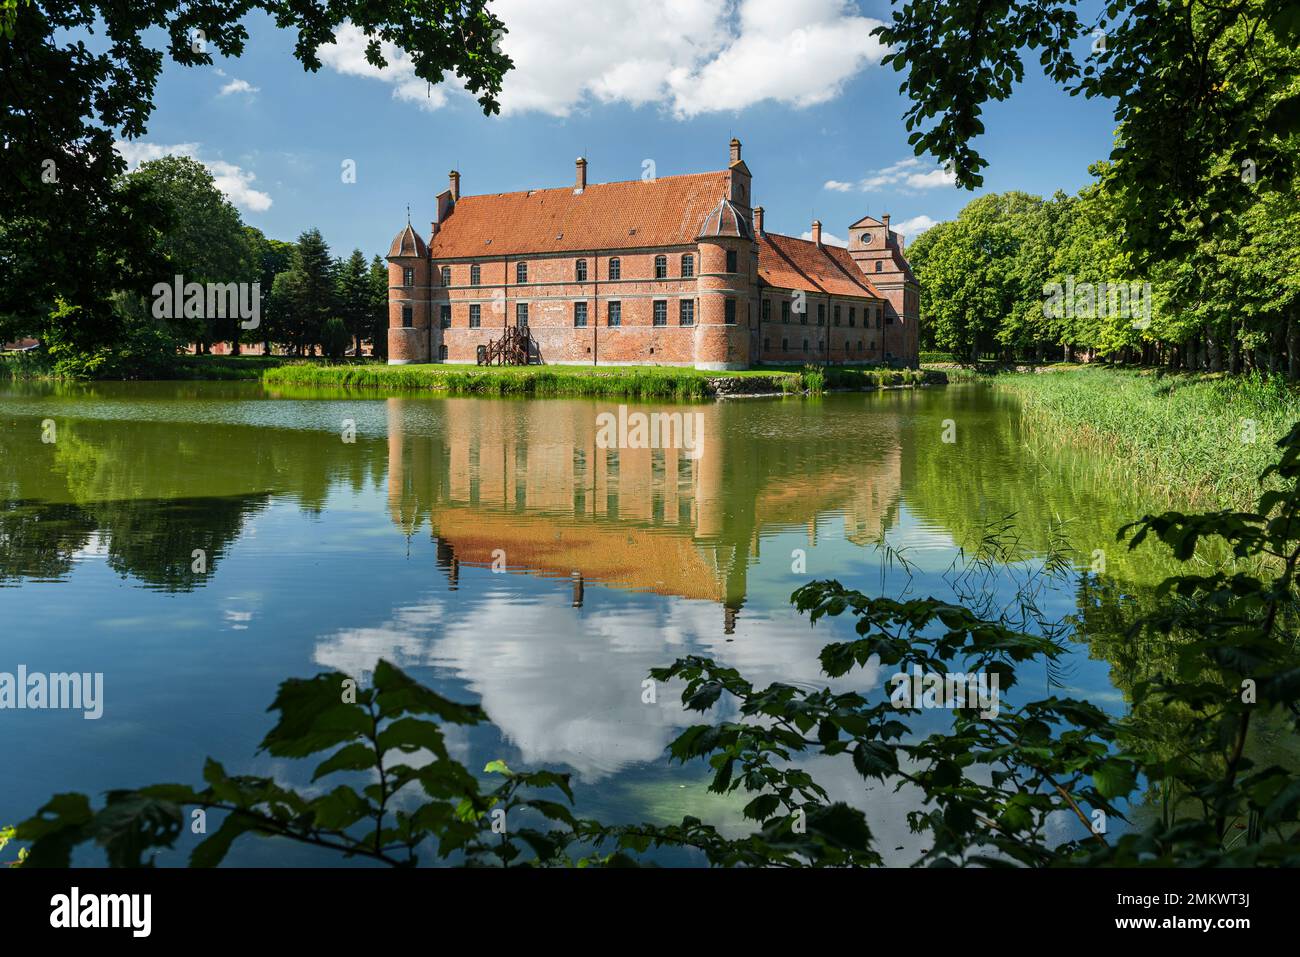 Denmark, Jutland, Djursland: The Renaissance facade of Rosenholm Castle reflected in the water and framed by leaves and branches Stock Photo